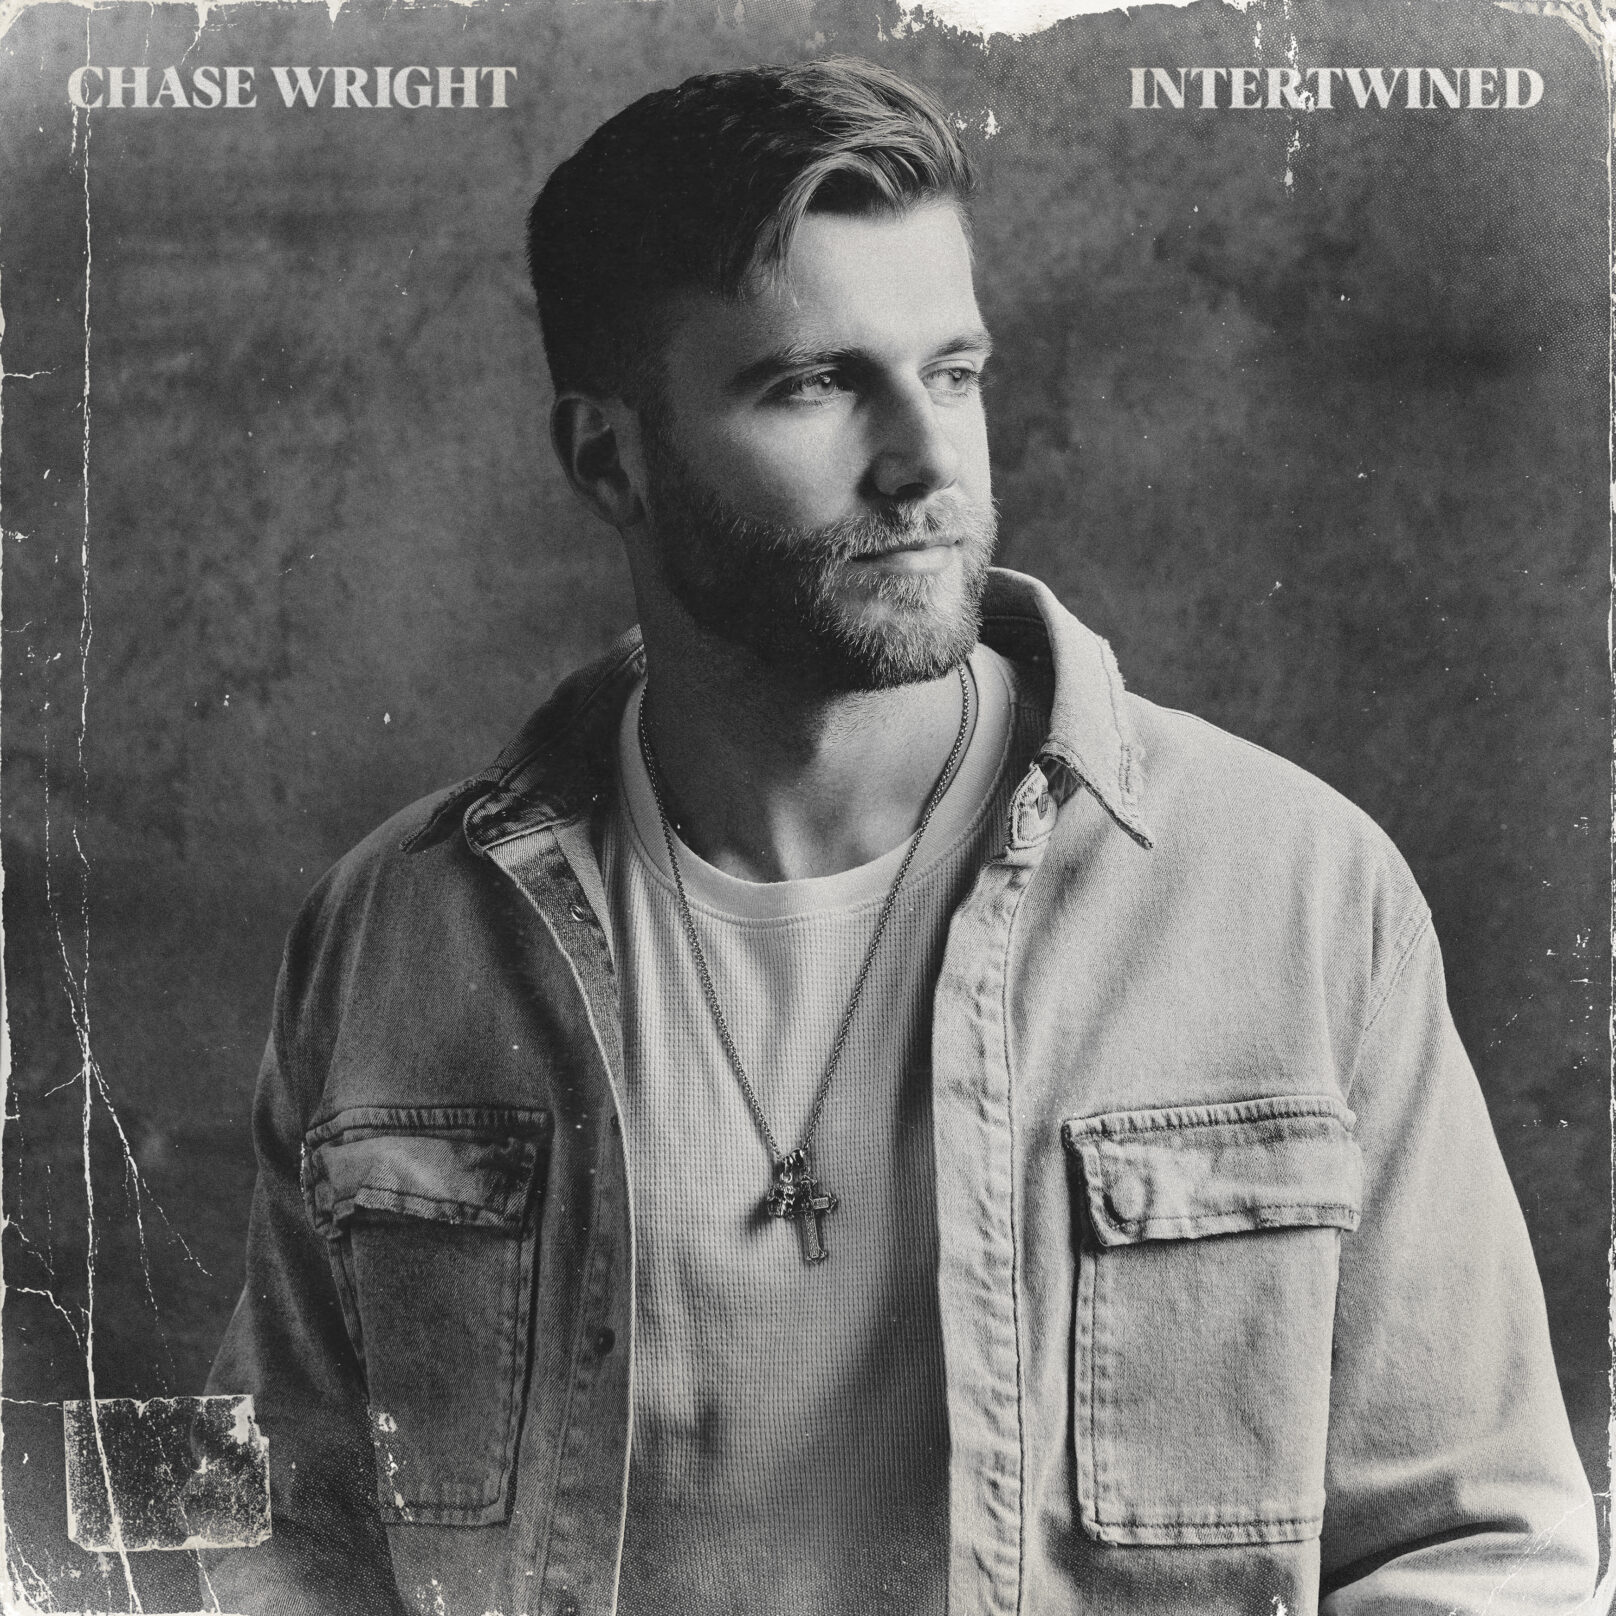 CHASE WRIGHT - INTERTWINED (Album Cover)